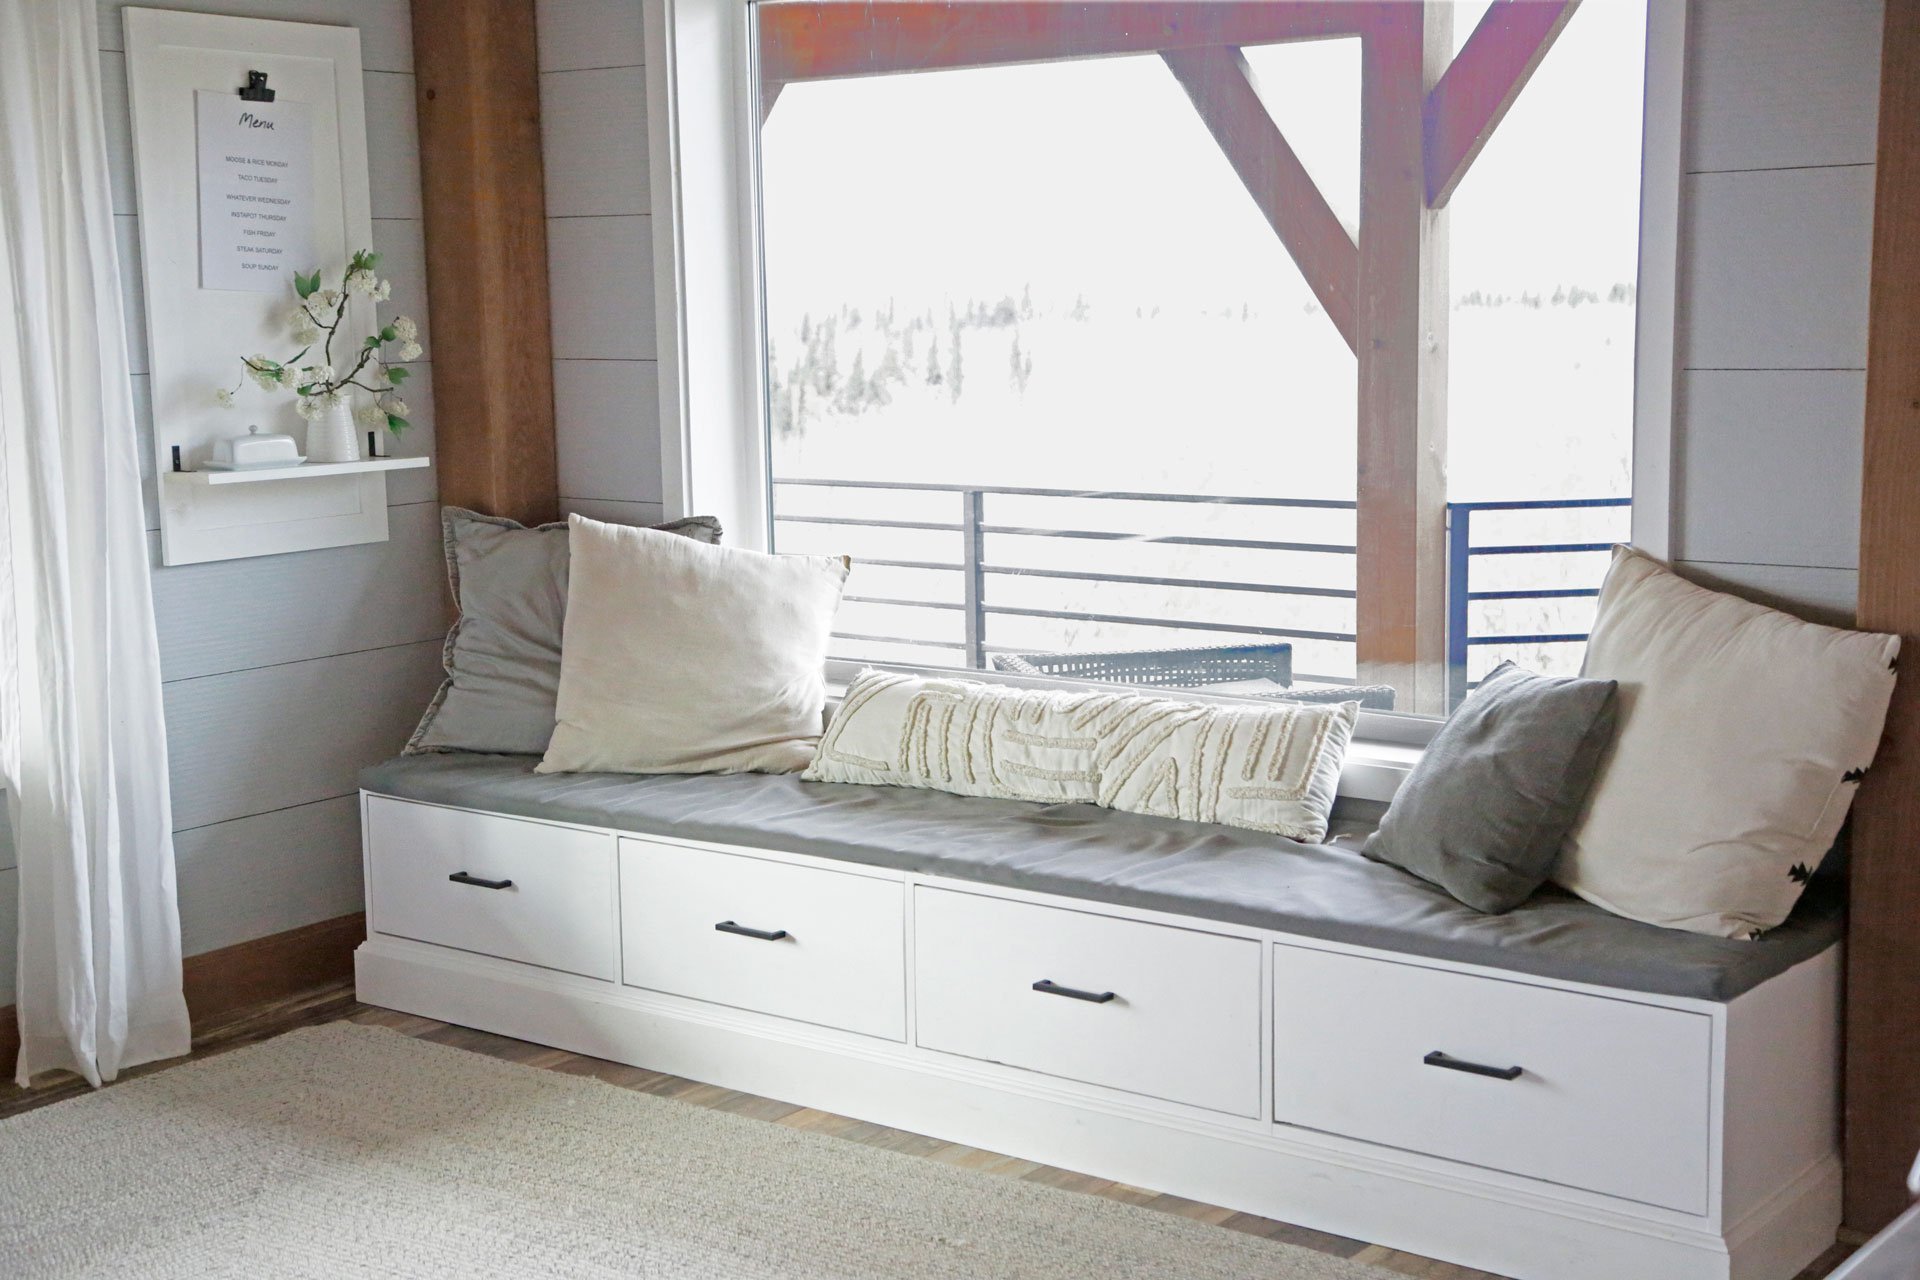 diy window seat with drawers